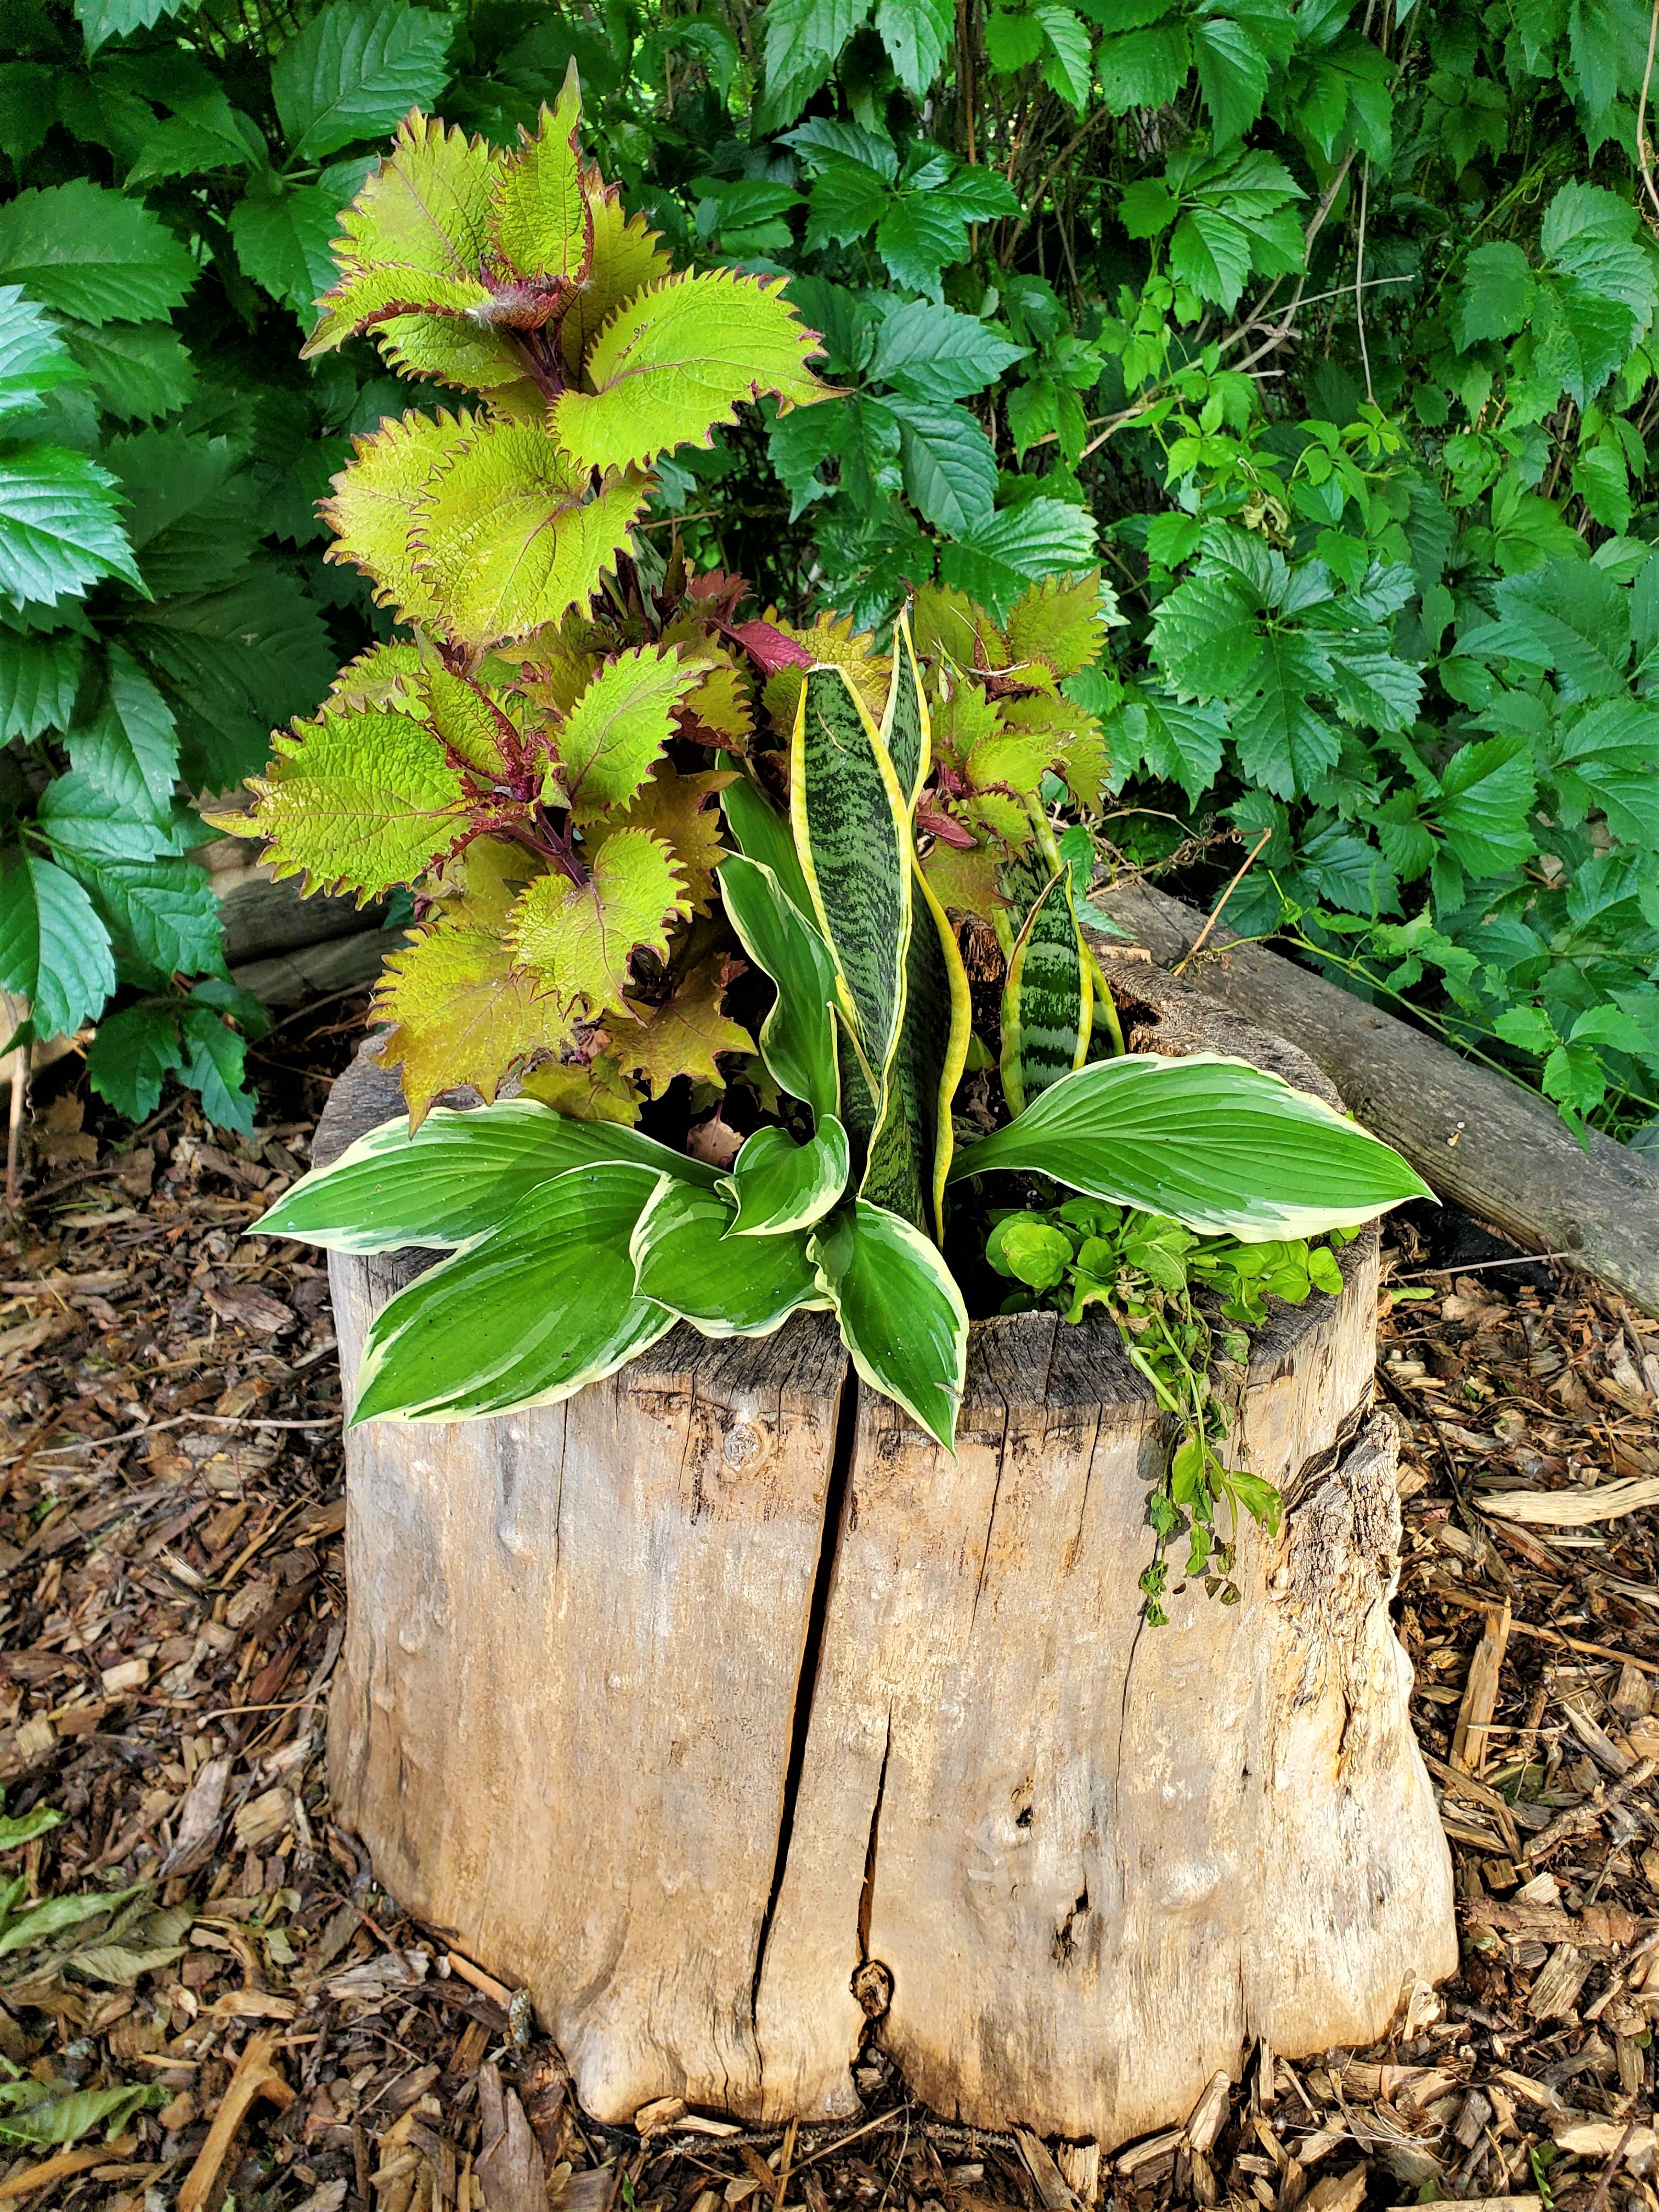 Plants in wood log used as outdoor decor. 